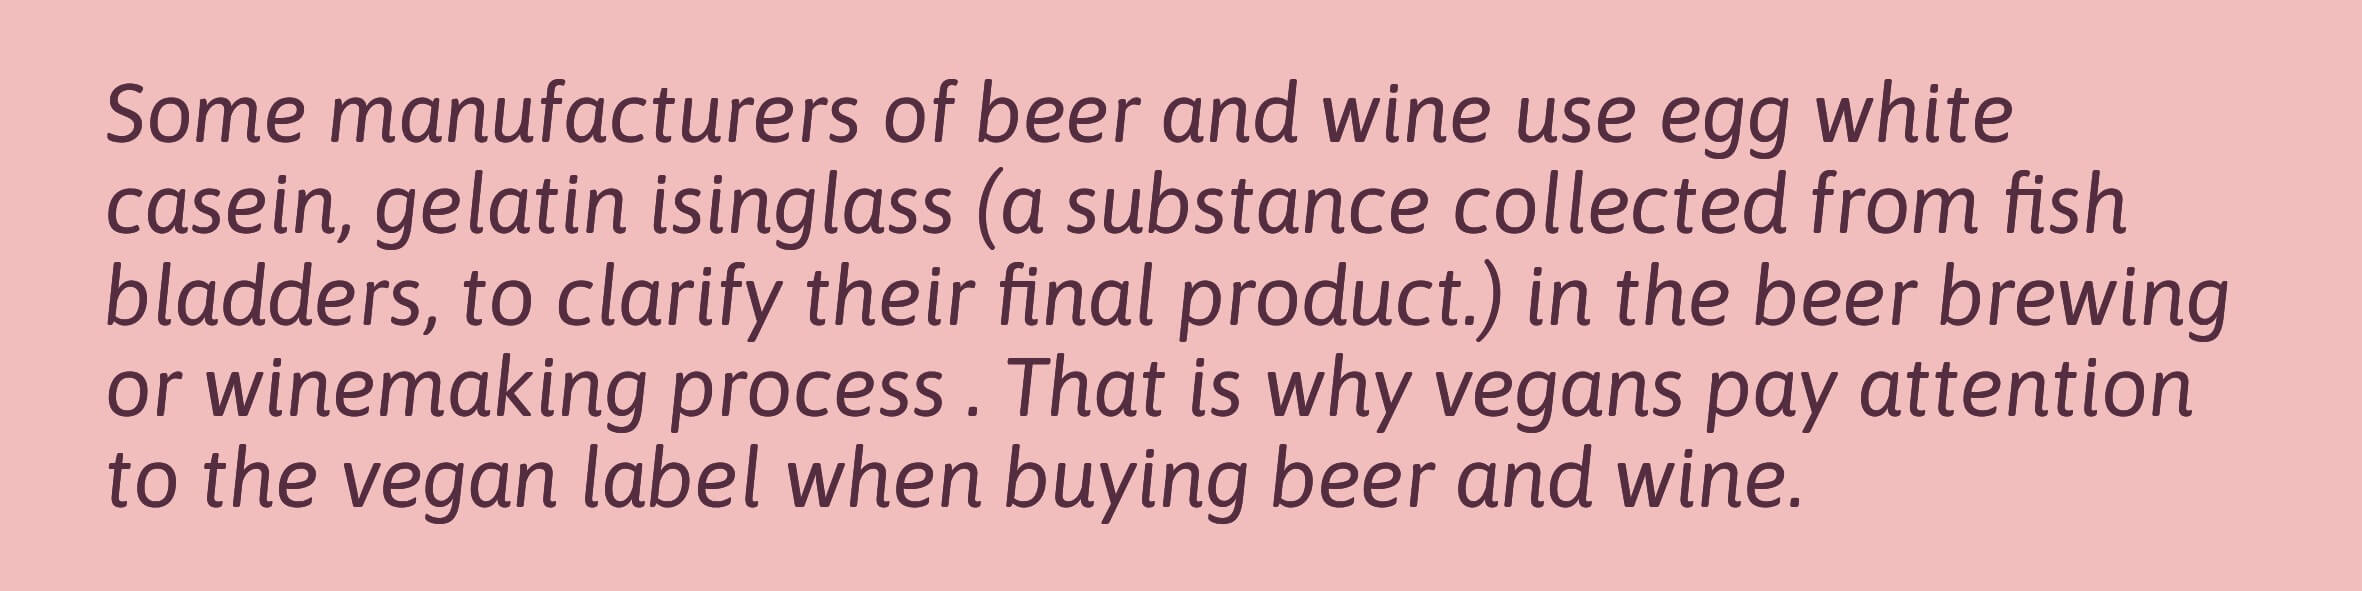 vegans pay attention to the vegan label when buying beer and wine.